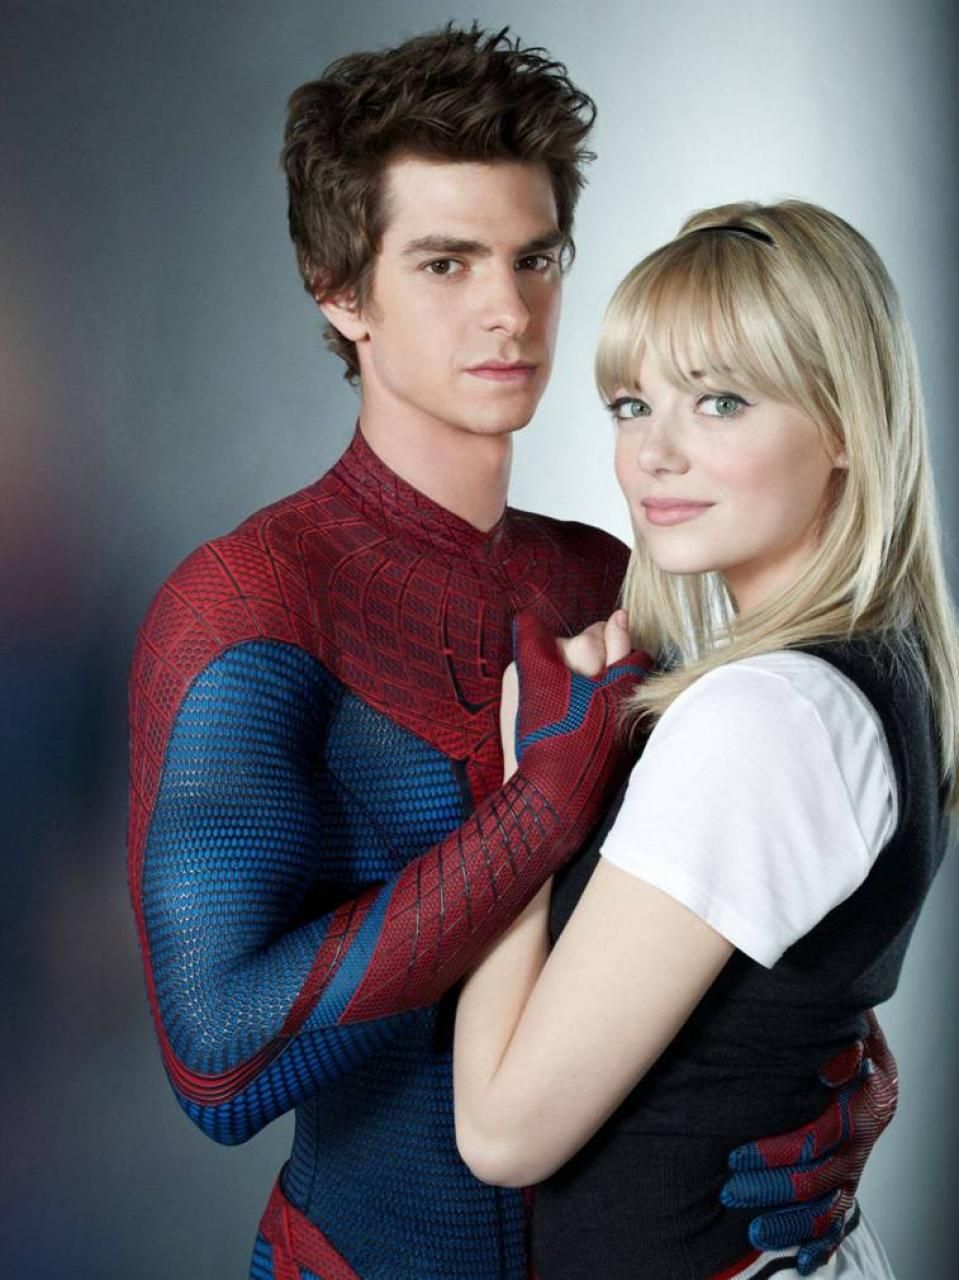 Andrew Garfield on Spider-Man: Why can’t he be gay? Why can’t he be into boys?